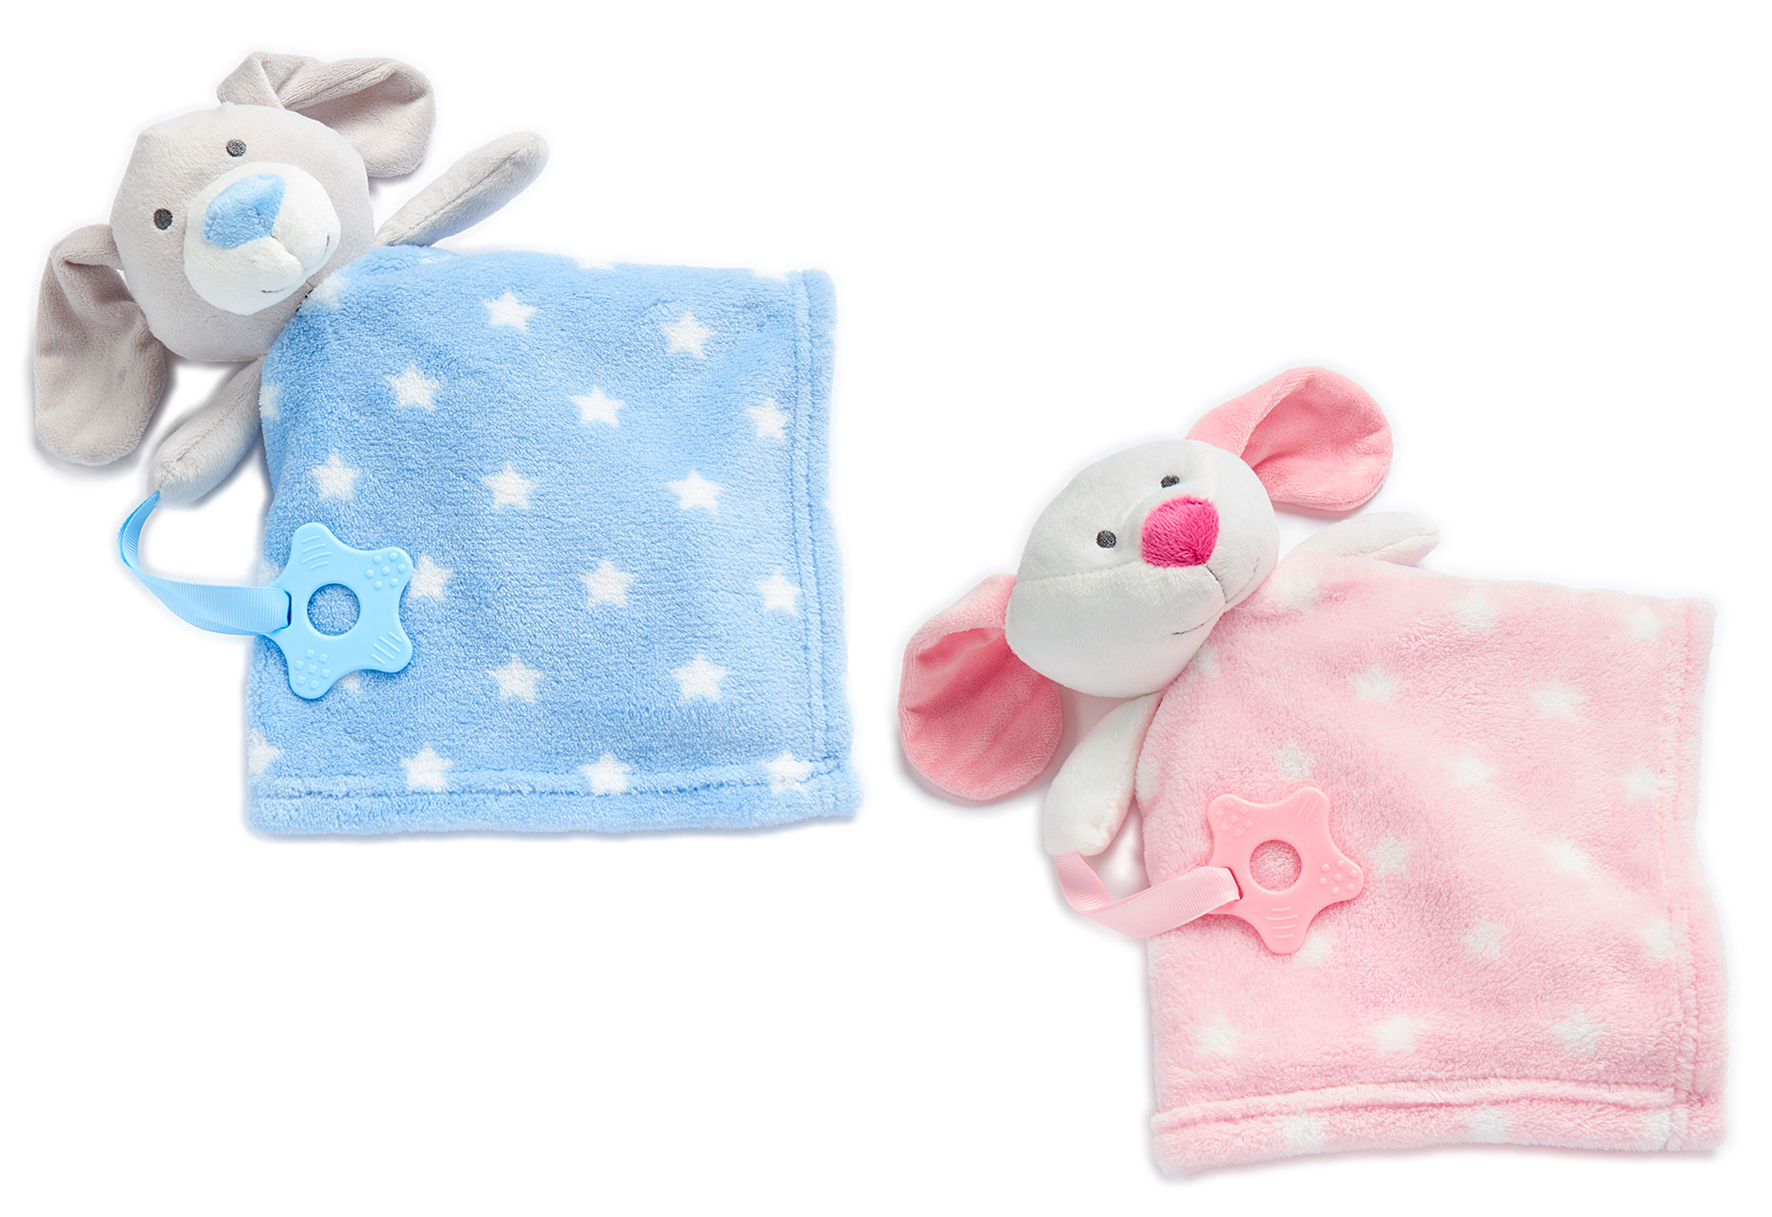 Printed Baby Blankets w/ Plush TOY Dog & Teether Accessory